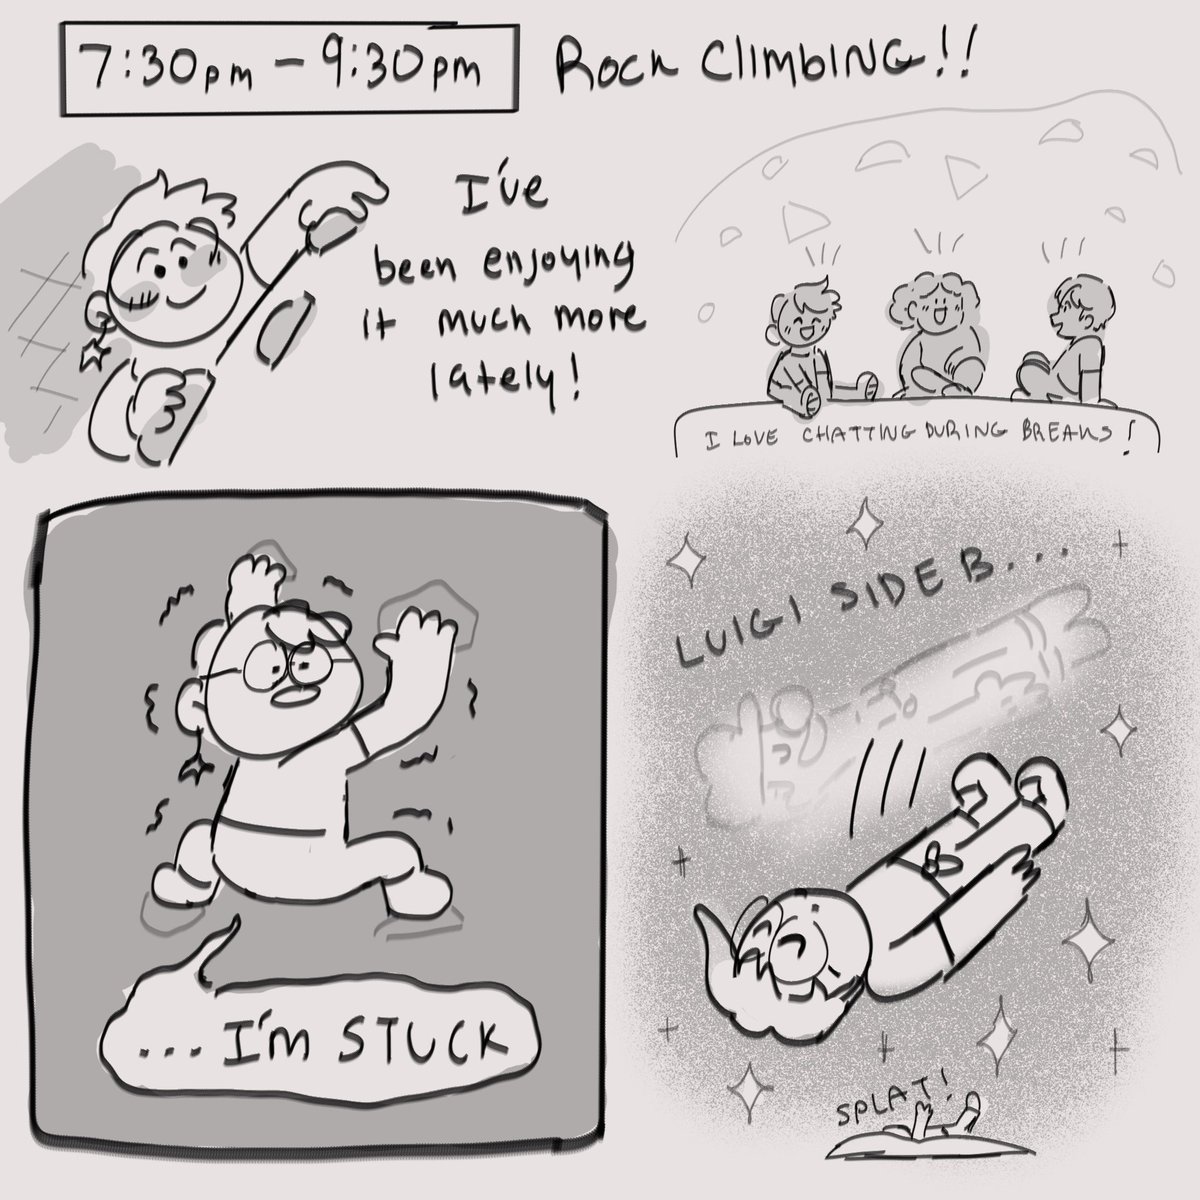 last of the hourlies!

5:30pm-11pm! 